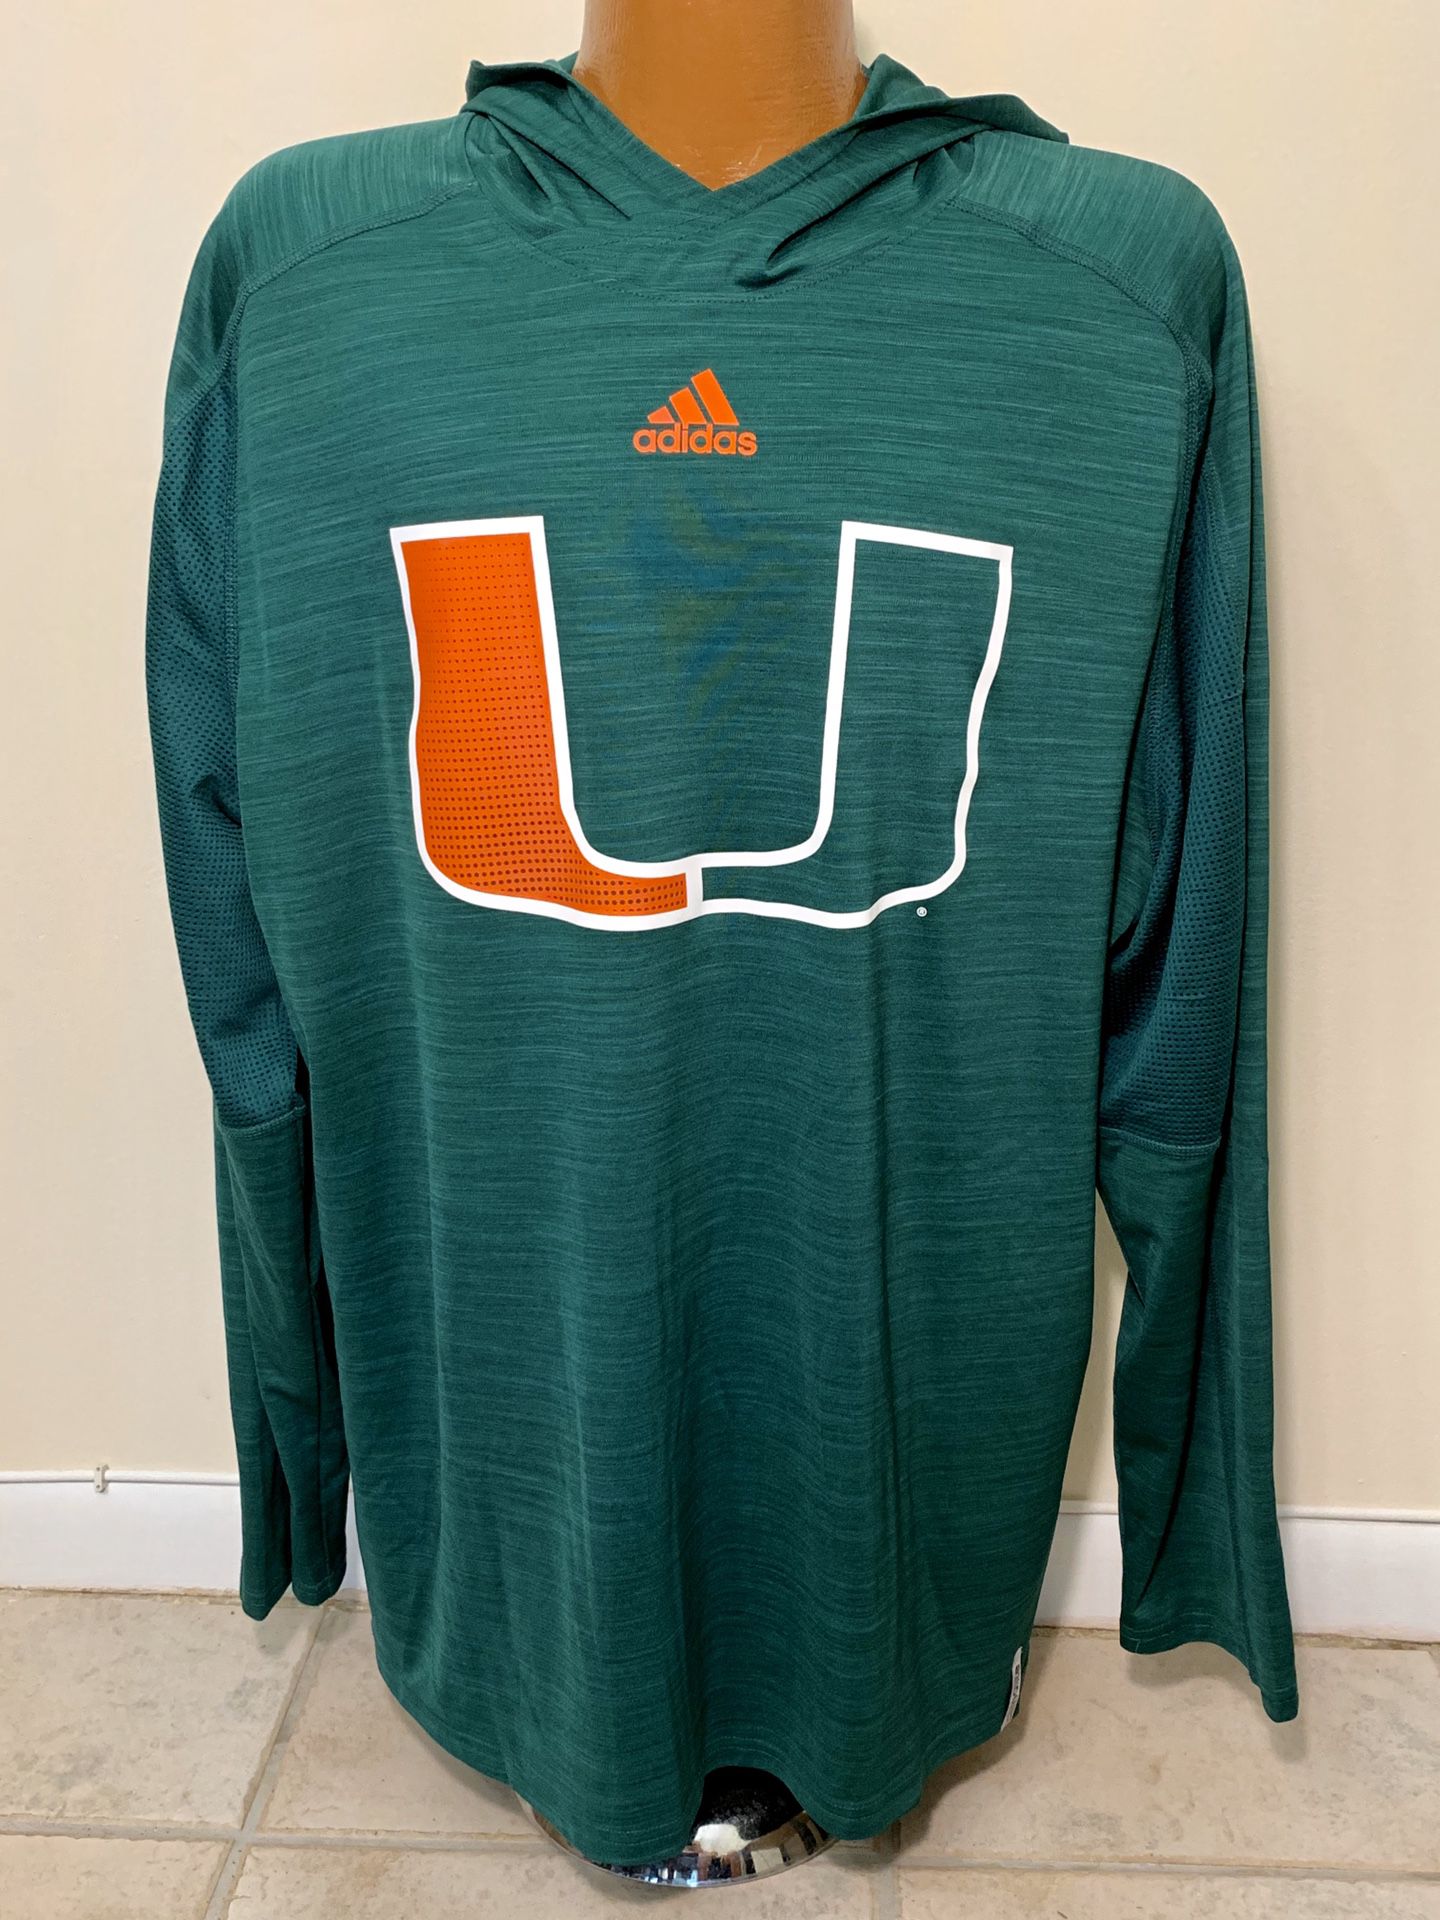 Adidas Miami Hurricanes Clima cool Hoodie. Very light. Size XXL. Great condition.